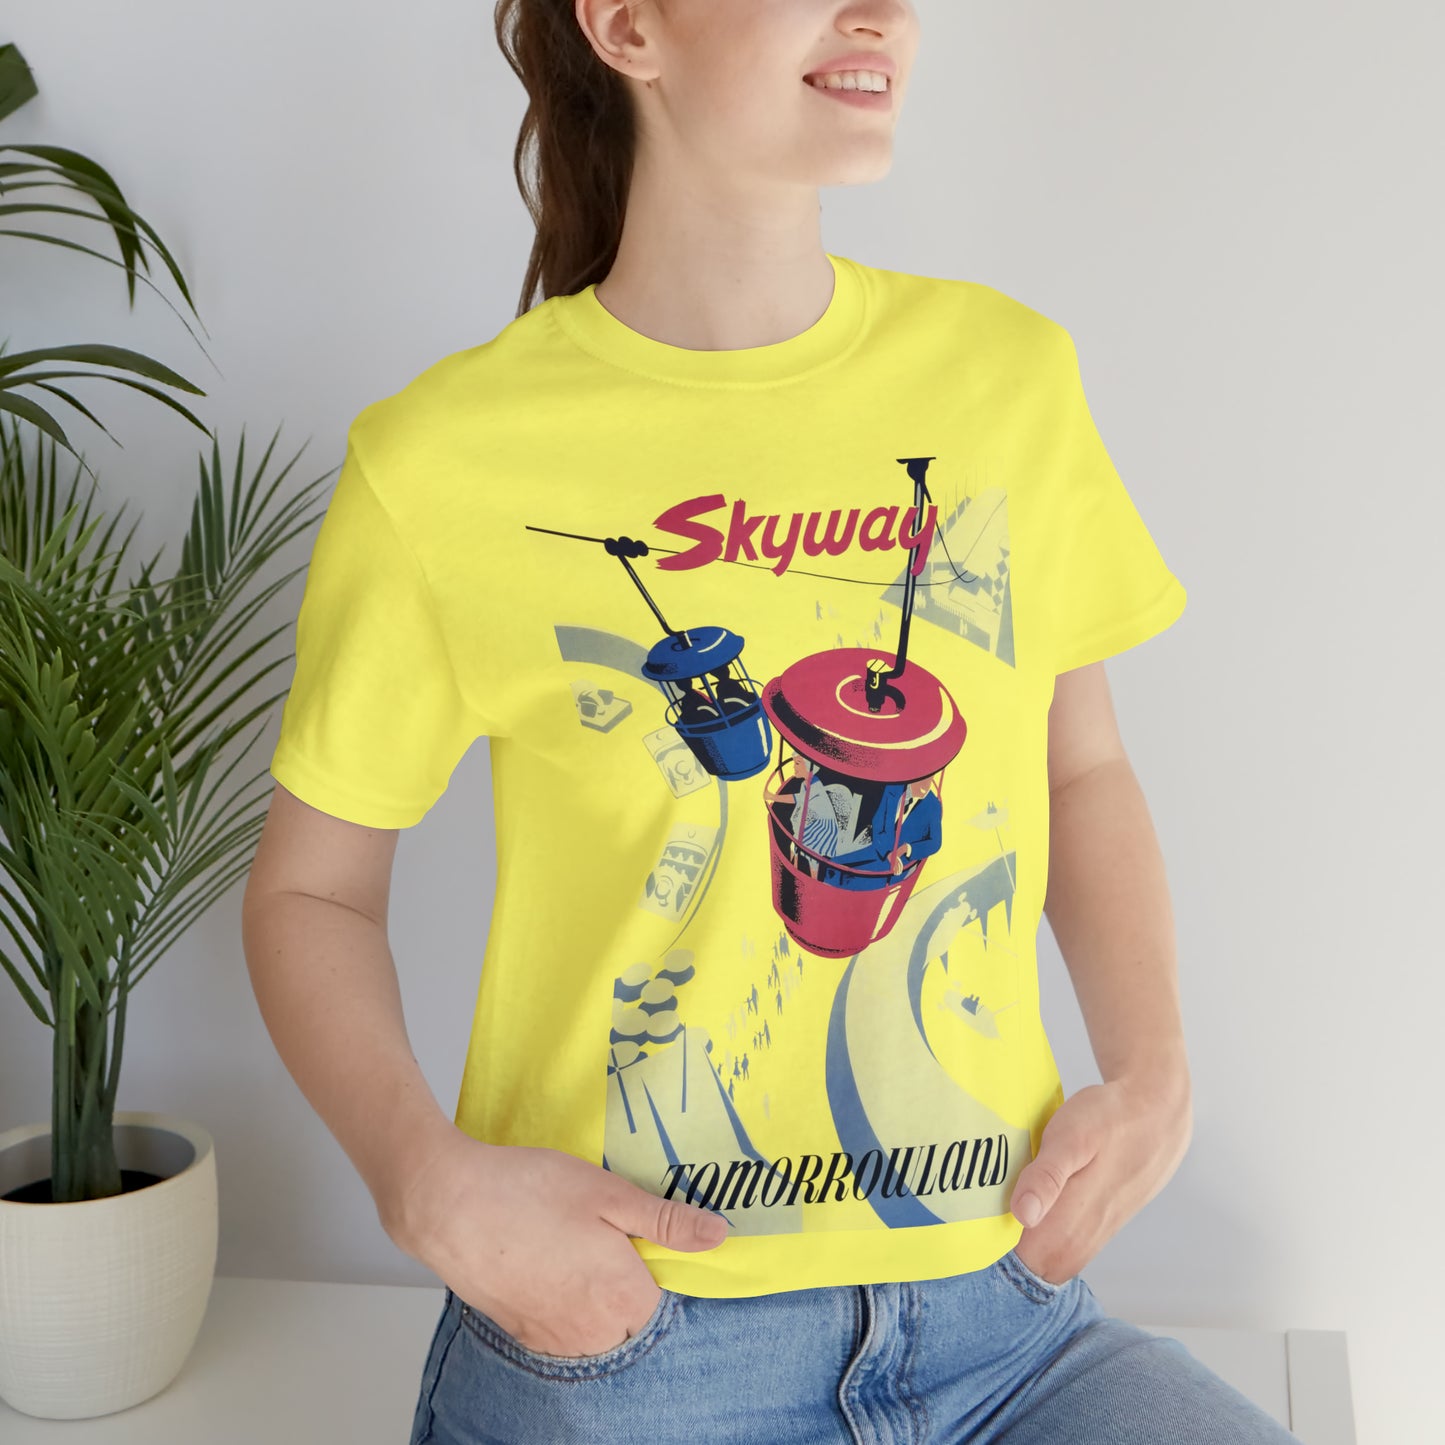 Tomorrowland Skyway Vintage Poster t-shirt